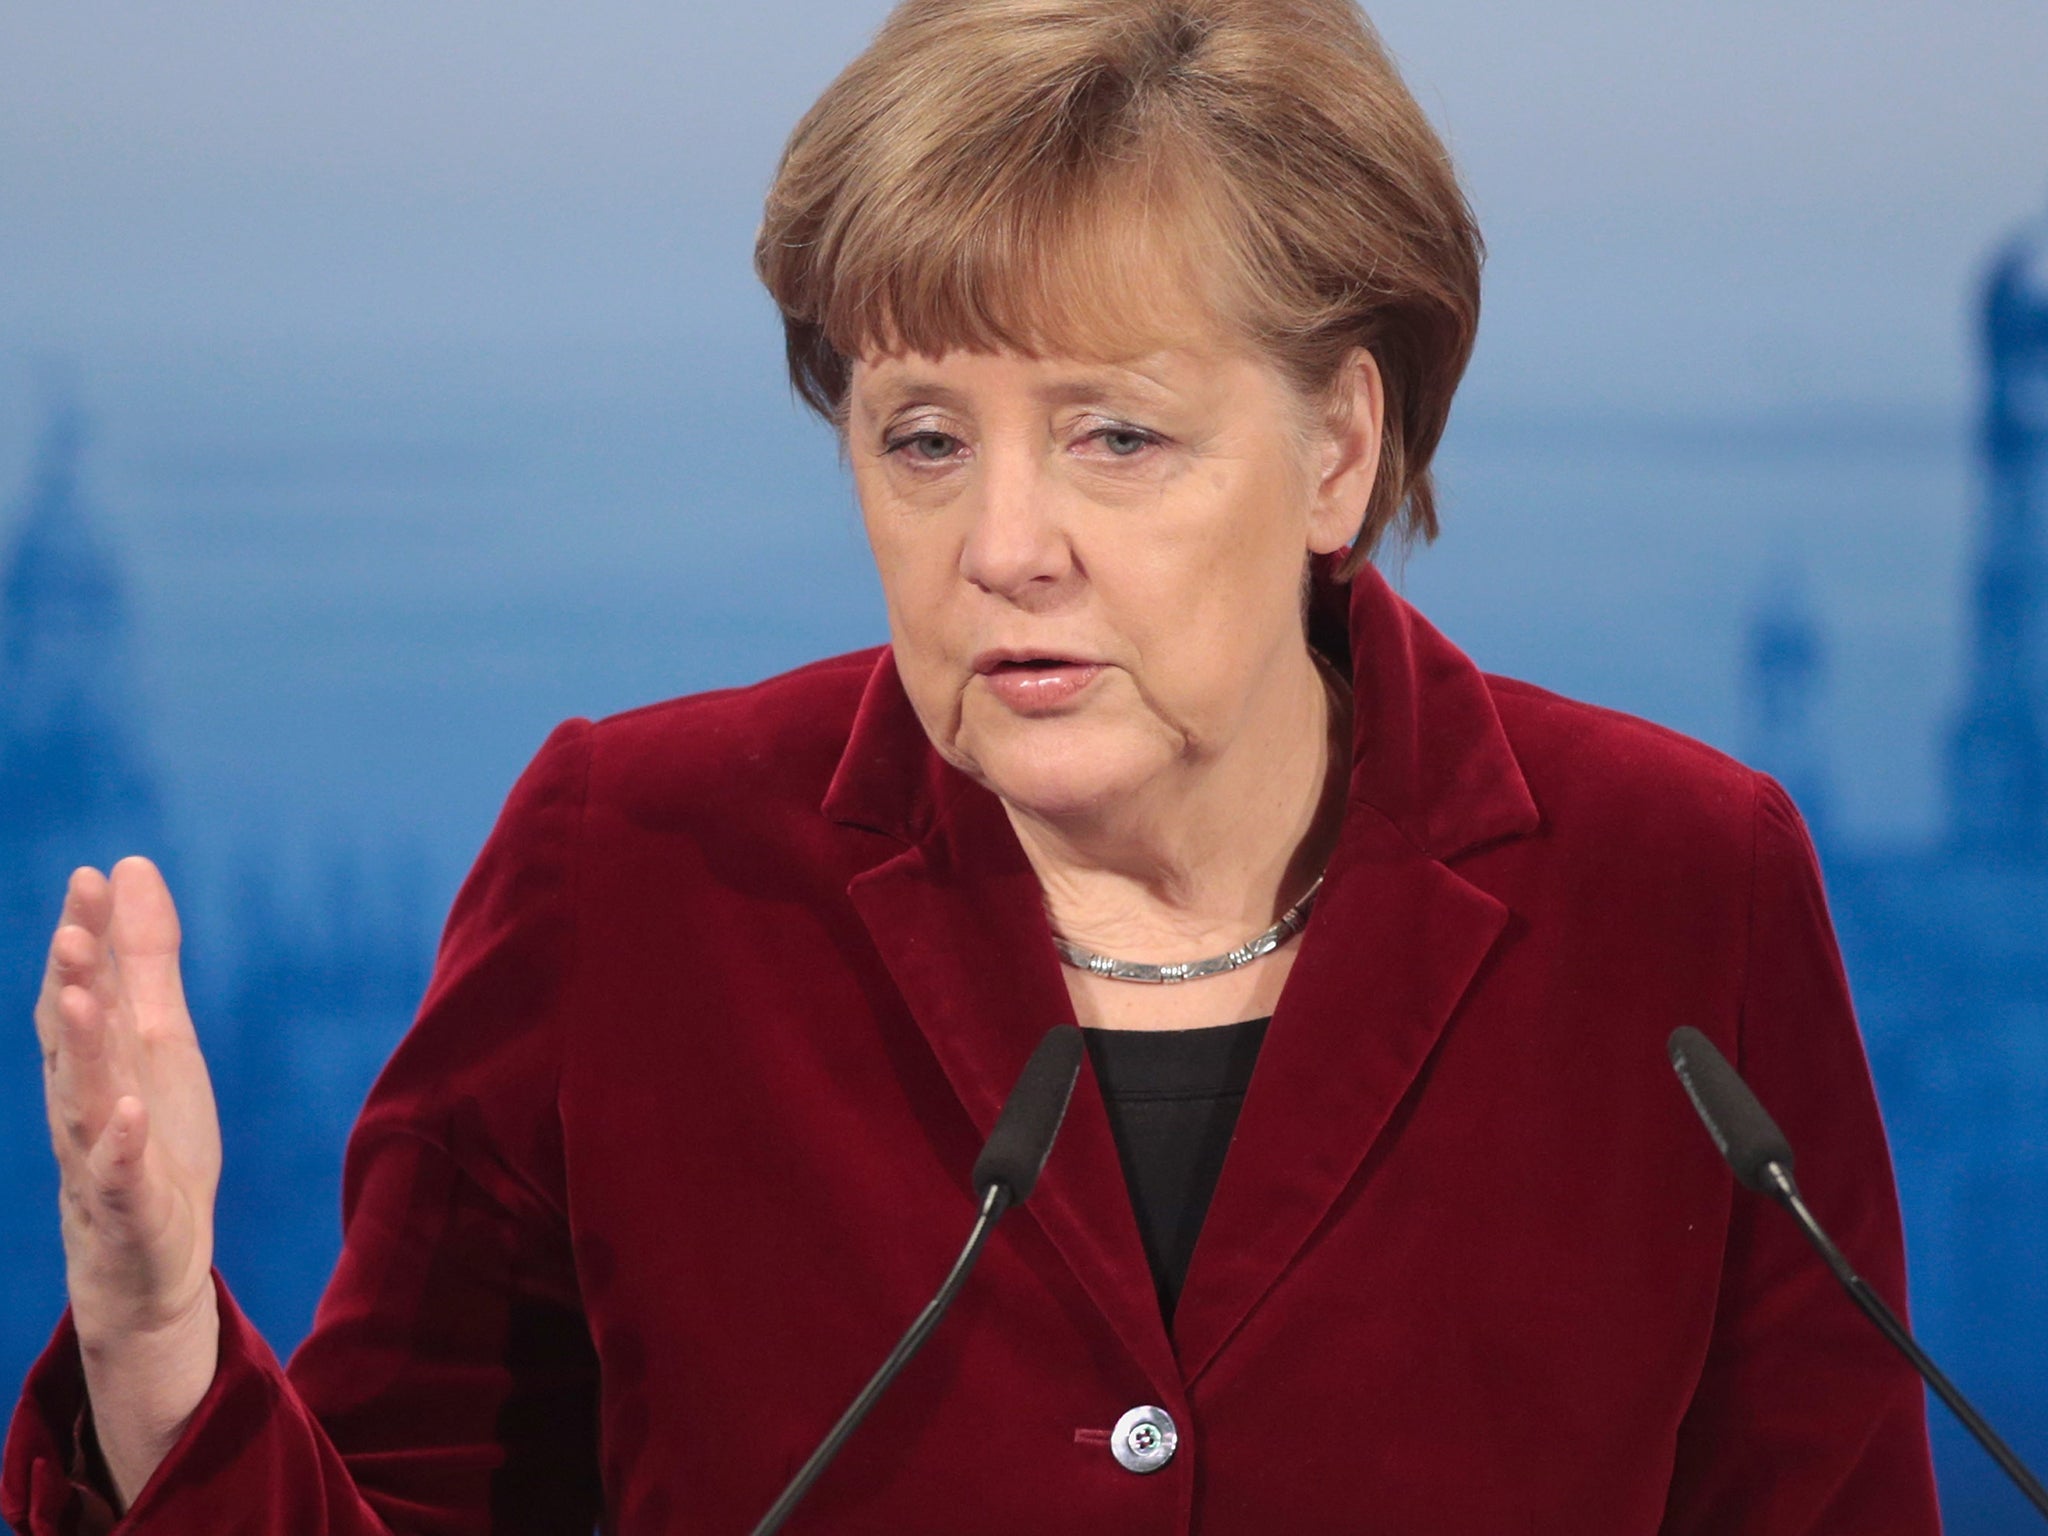 German Chancellor Angela Merkel will have an important role in Greece's Eurozone future